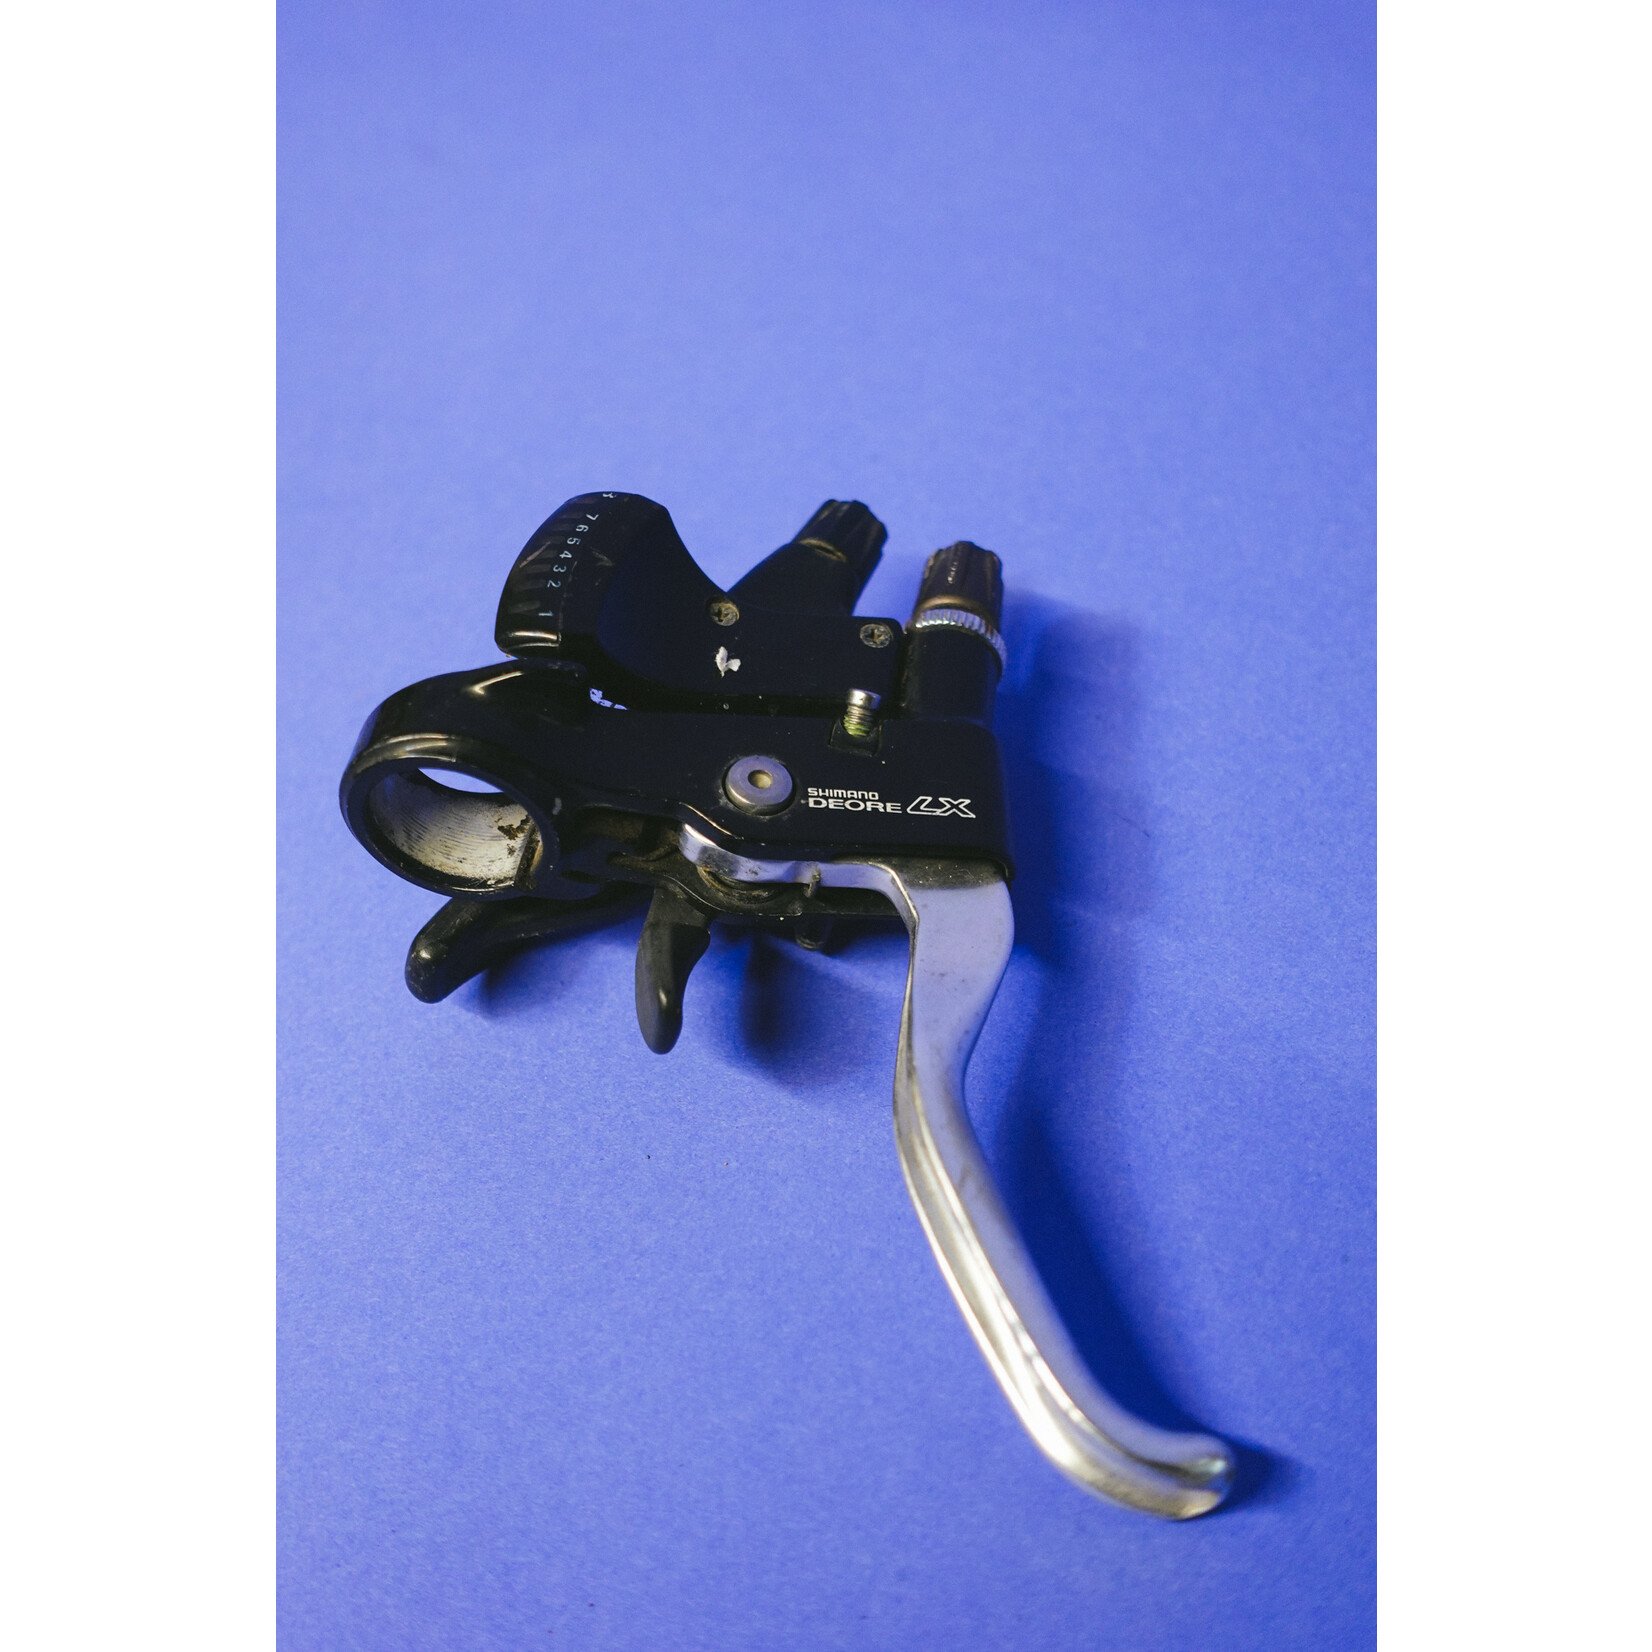 Shimano Deore LX ST-M567 3x8 Brake Levers/Shifters